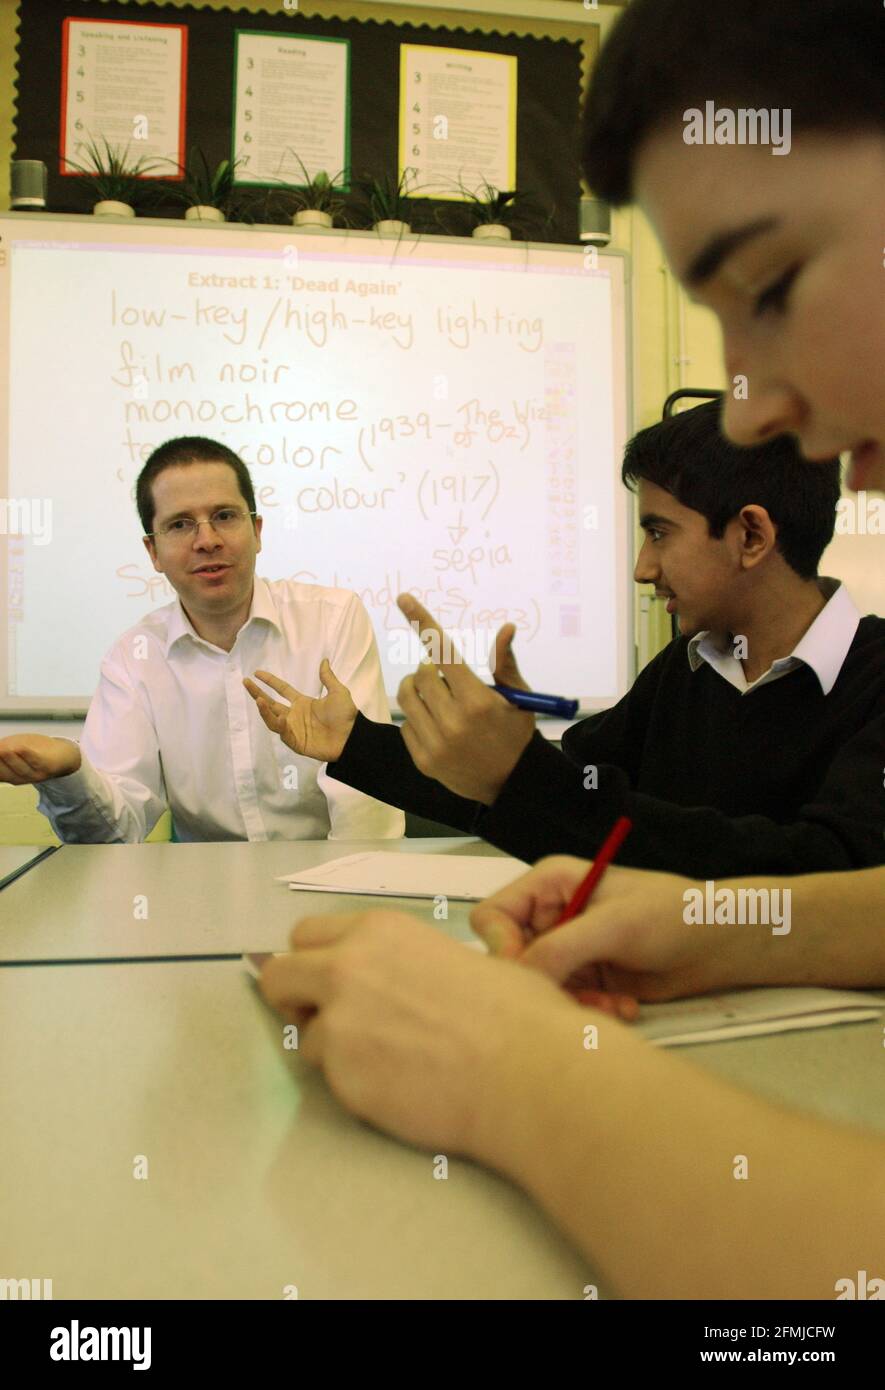 PUPILS,ASIM MOHAMMED AND JAMES STEADMAN OBSERVE  THEIR TEACHER, MATTHEW SAVAGE'S PERFORMANCE IN CLASS,PART OF A NEW INITIATIVE AT THE GEORGE MITCHELL SCHOOL IN  LEYTONSTONE,LONDON OF FEEDBACK FROM THE PUPILS ON THE TEACHERS PERFORMANCE.10/1/05 TOM PILSTON Stock Photo